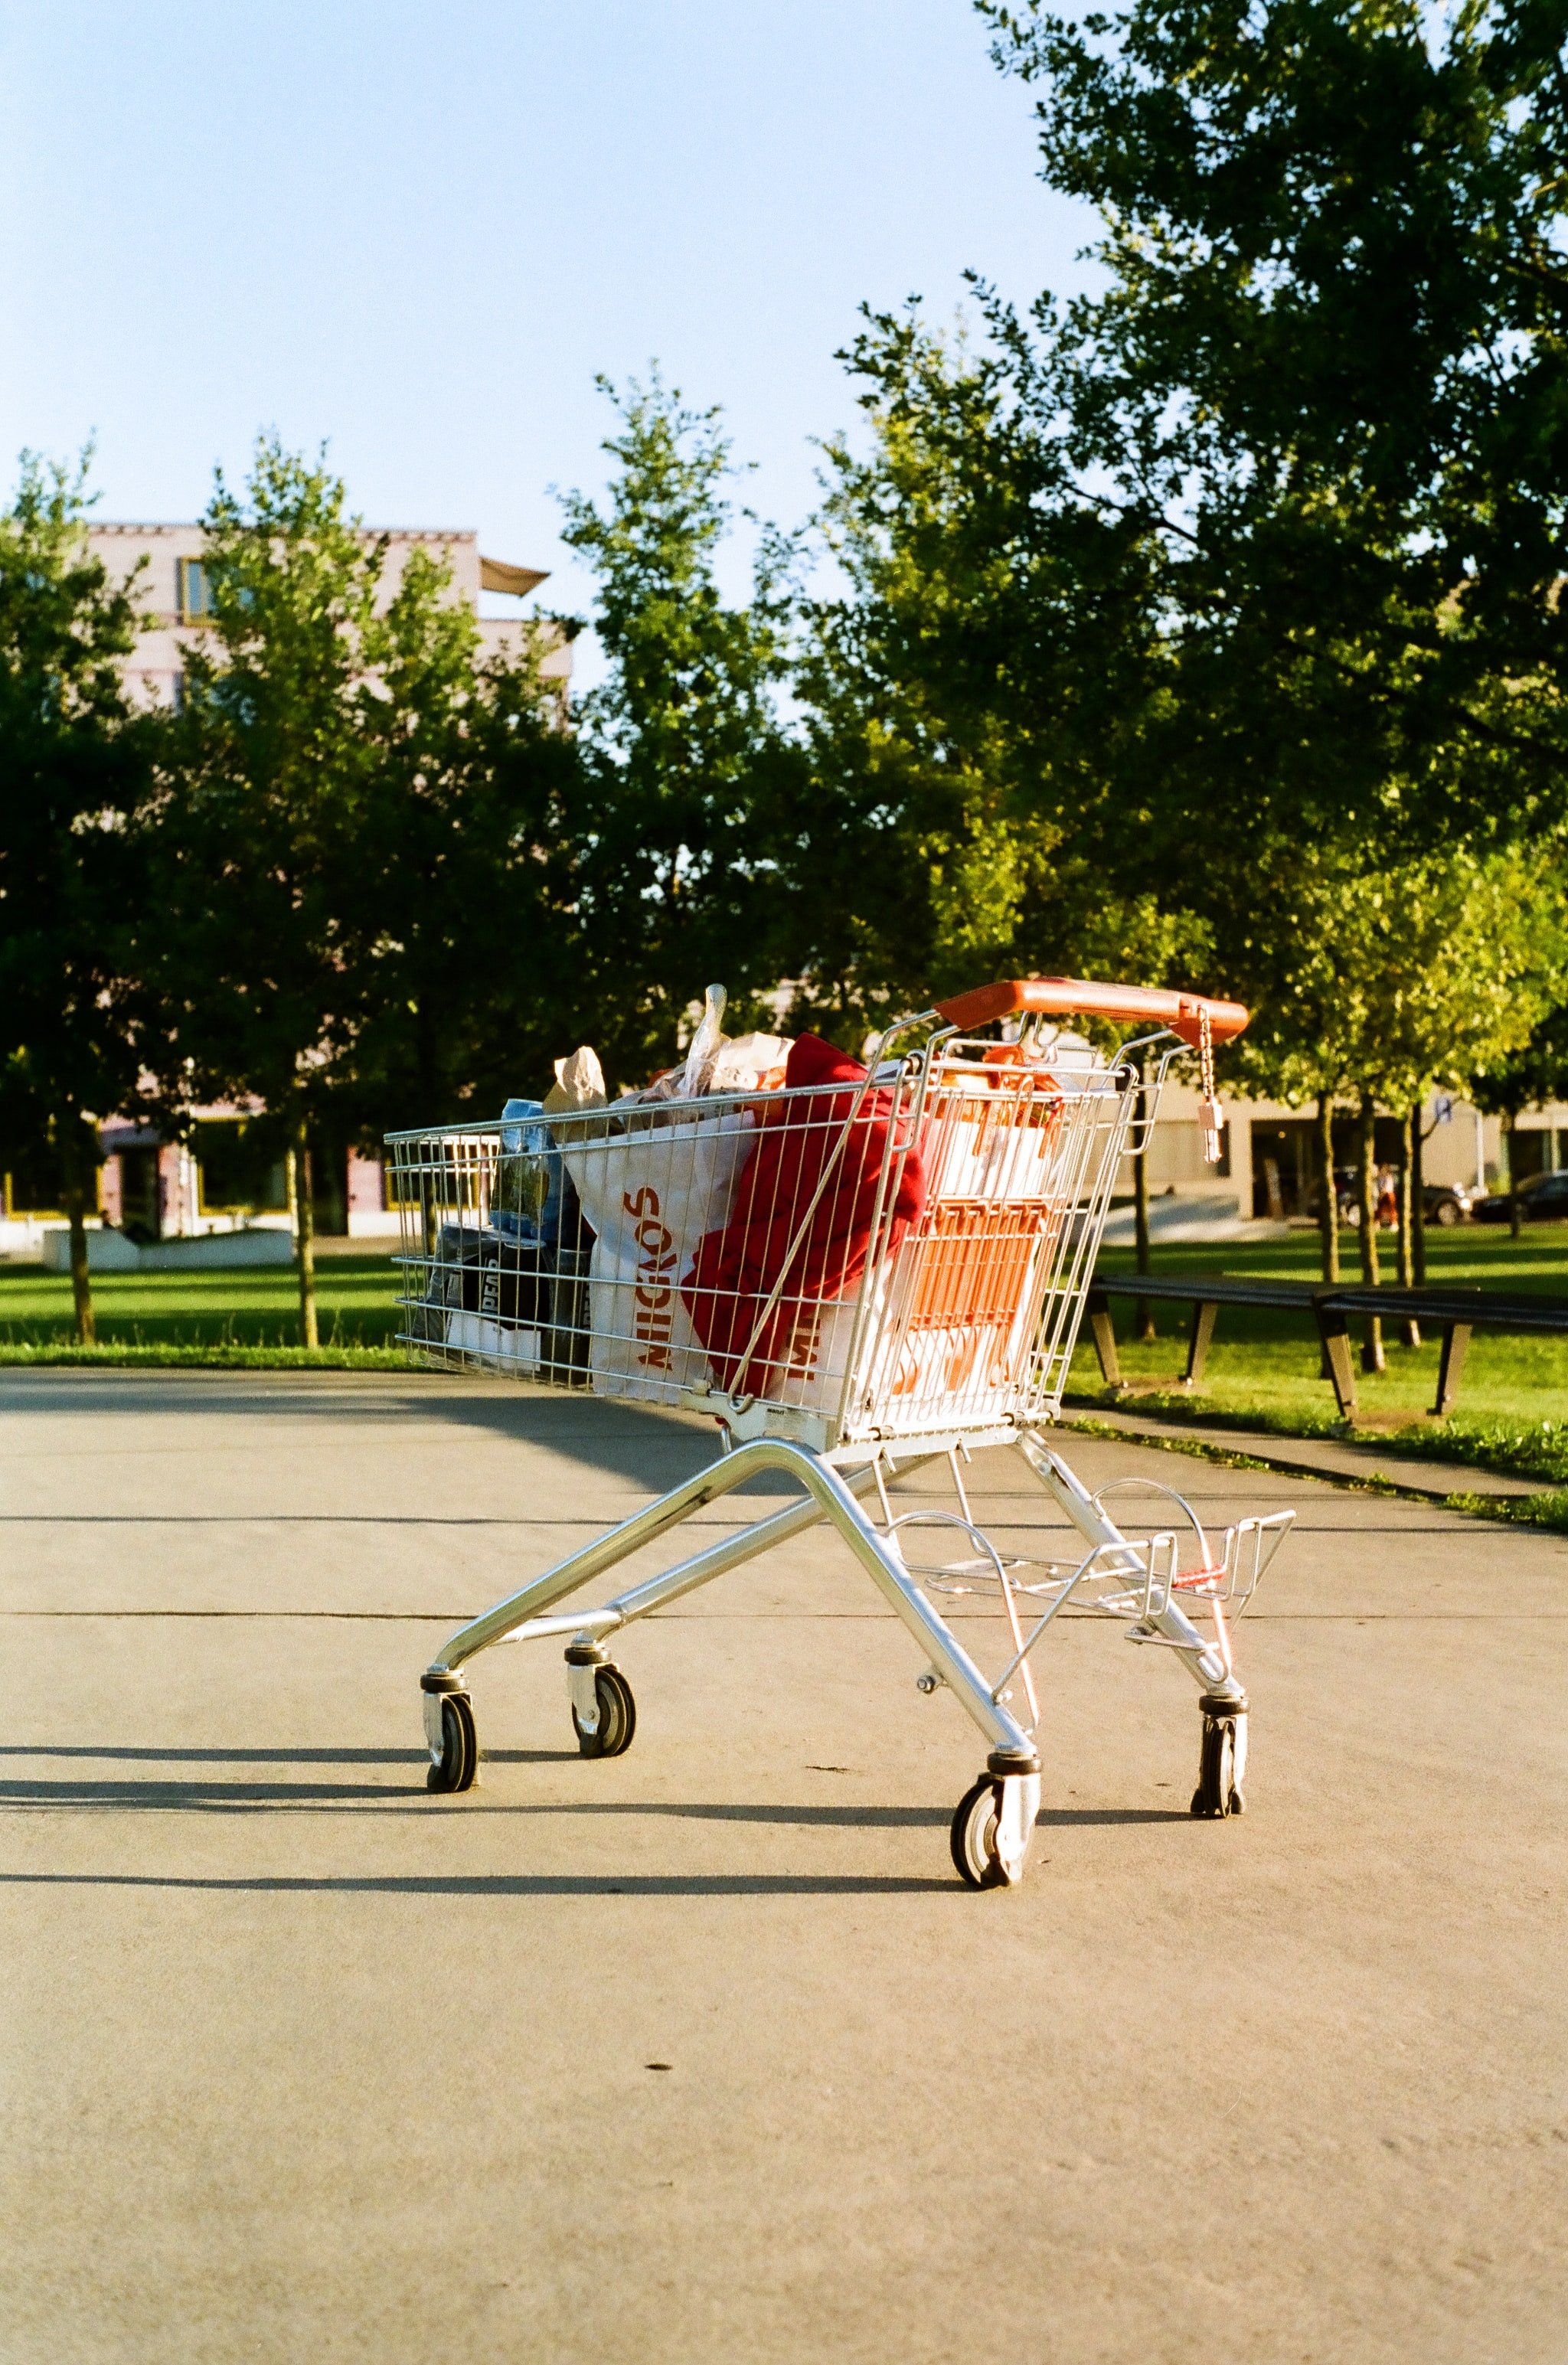 The shopping cart was heavy and Danny's mom was very tired. | Unsplash